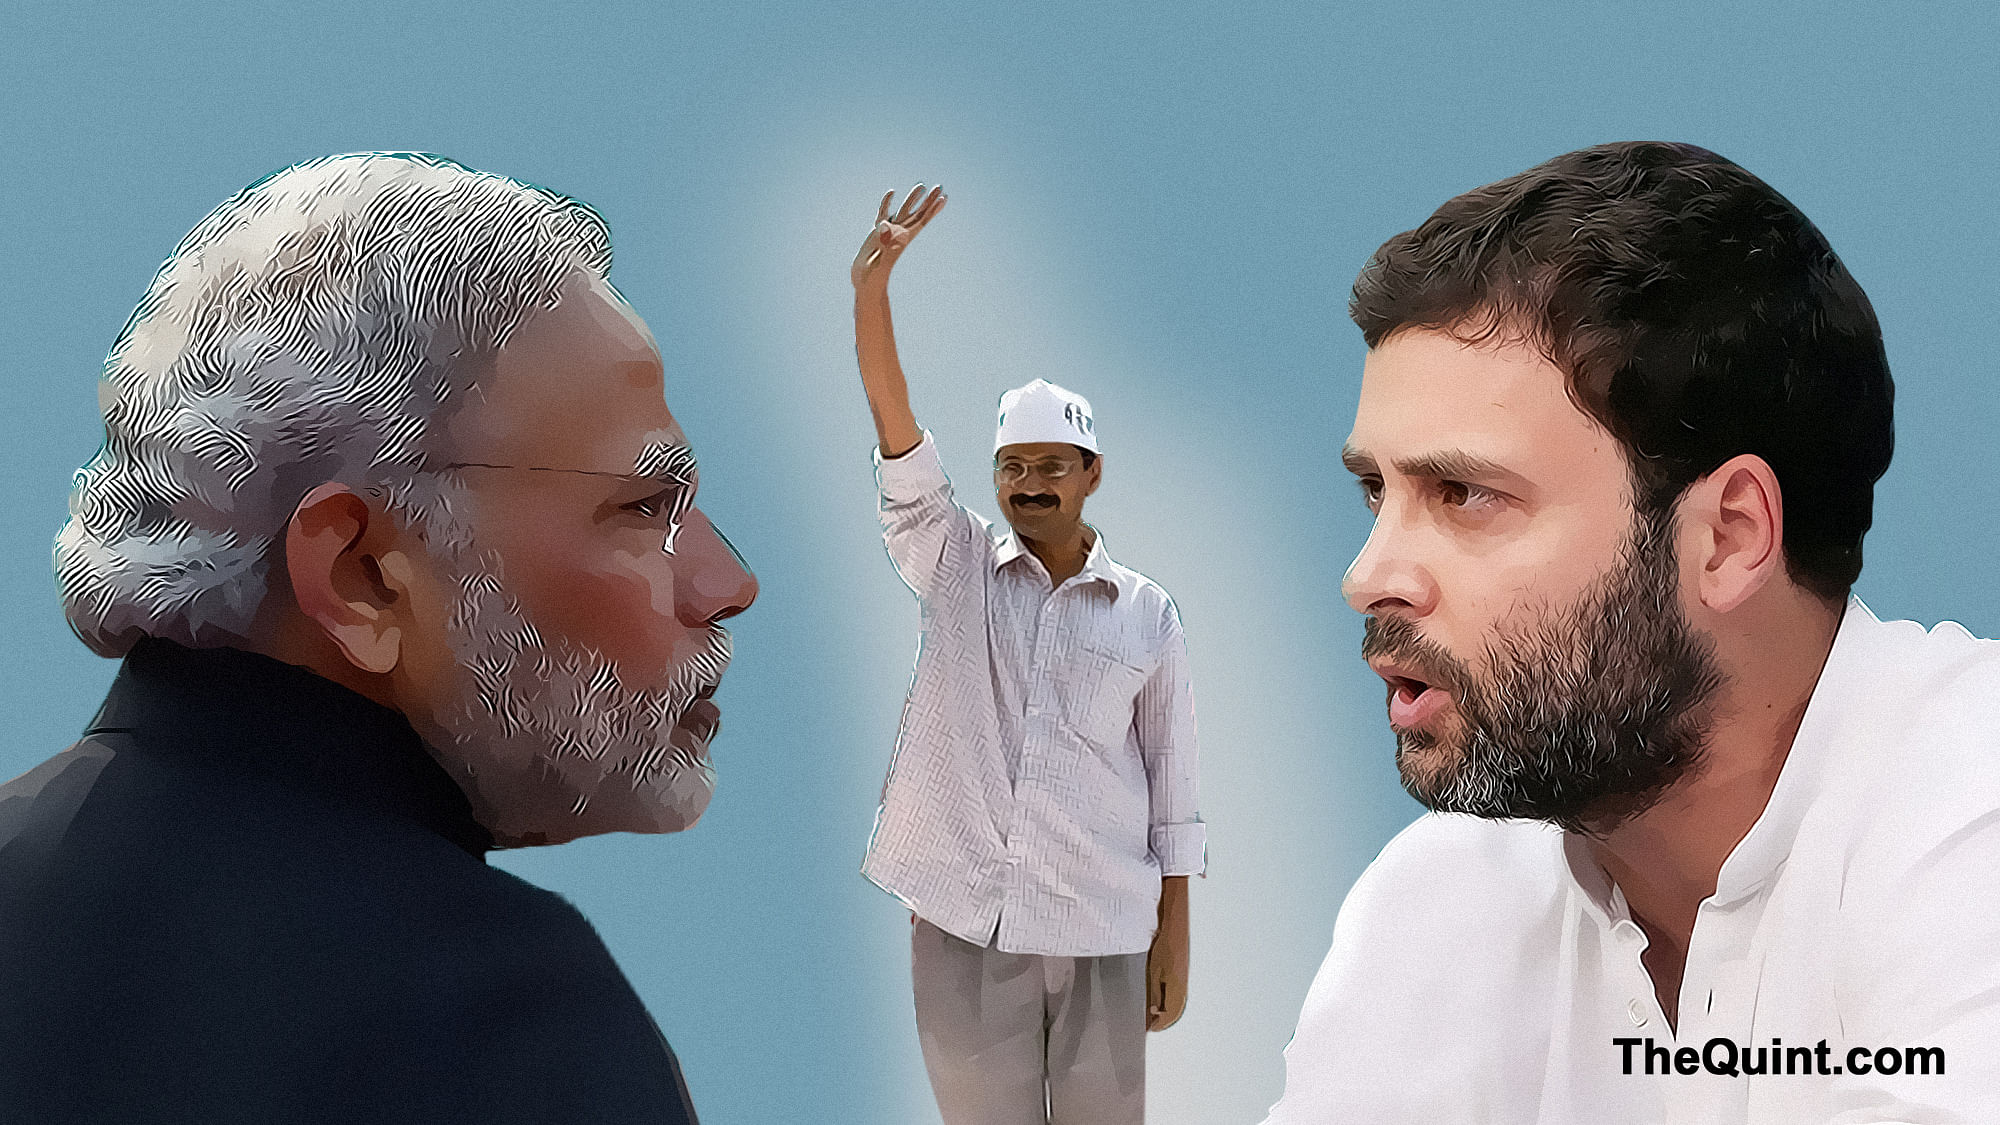 Kejriwal is the new entrant in politics of Gujarat, which has seen a two-way fight between BJP and Congress for a long time. (Image: <b>The Quint</b>/Hardeep Singh)